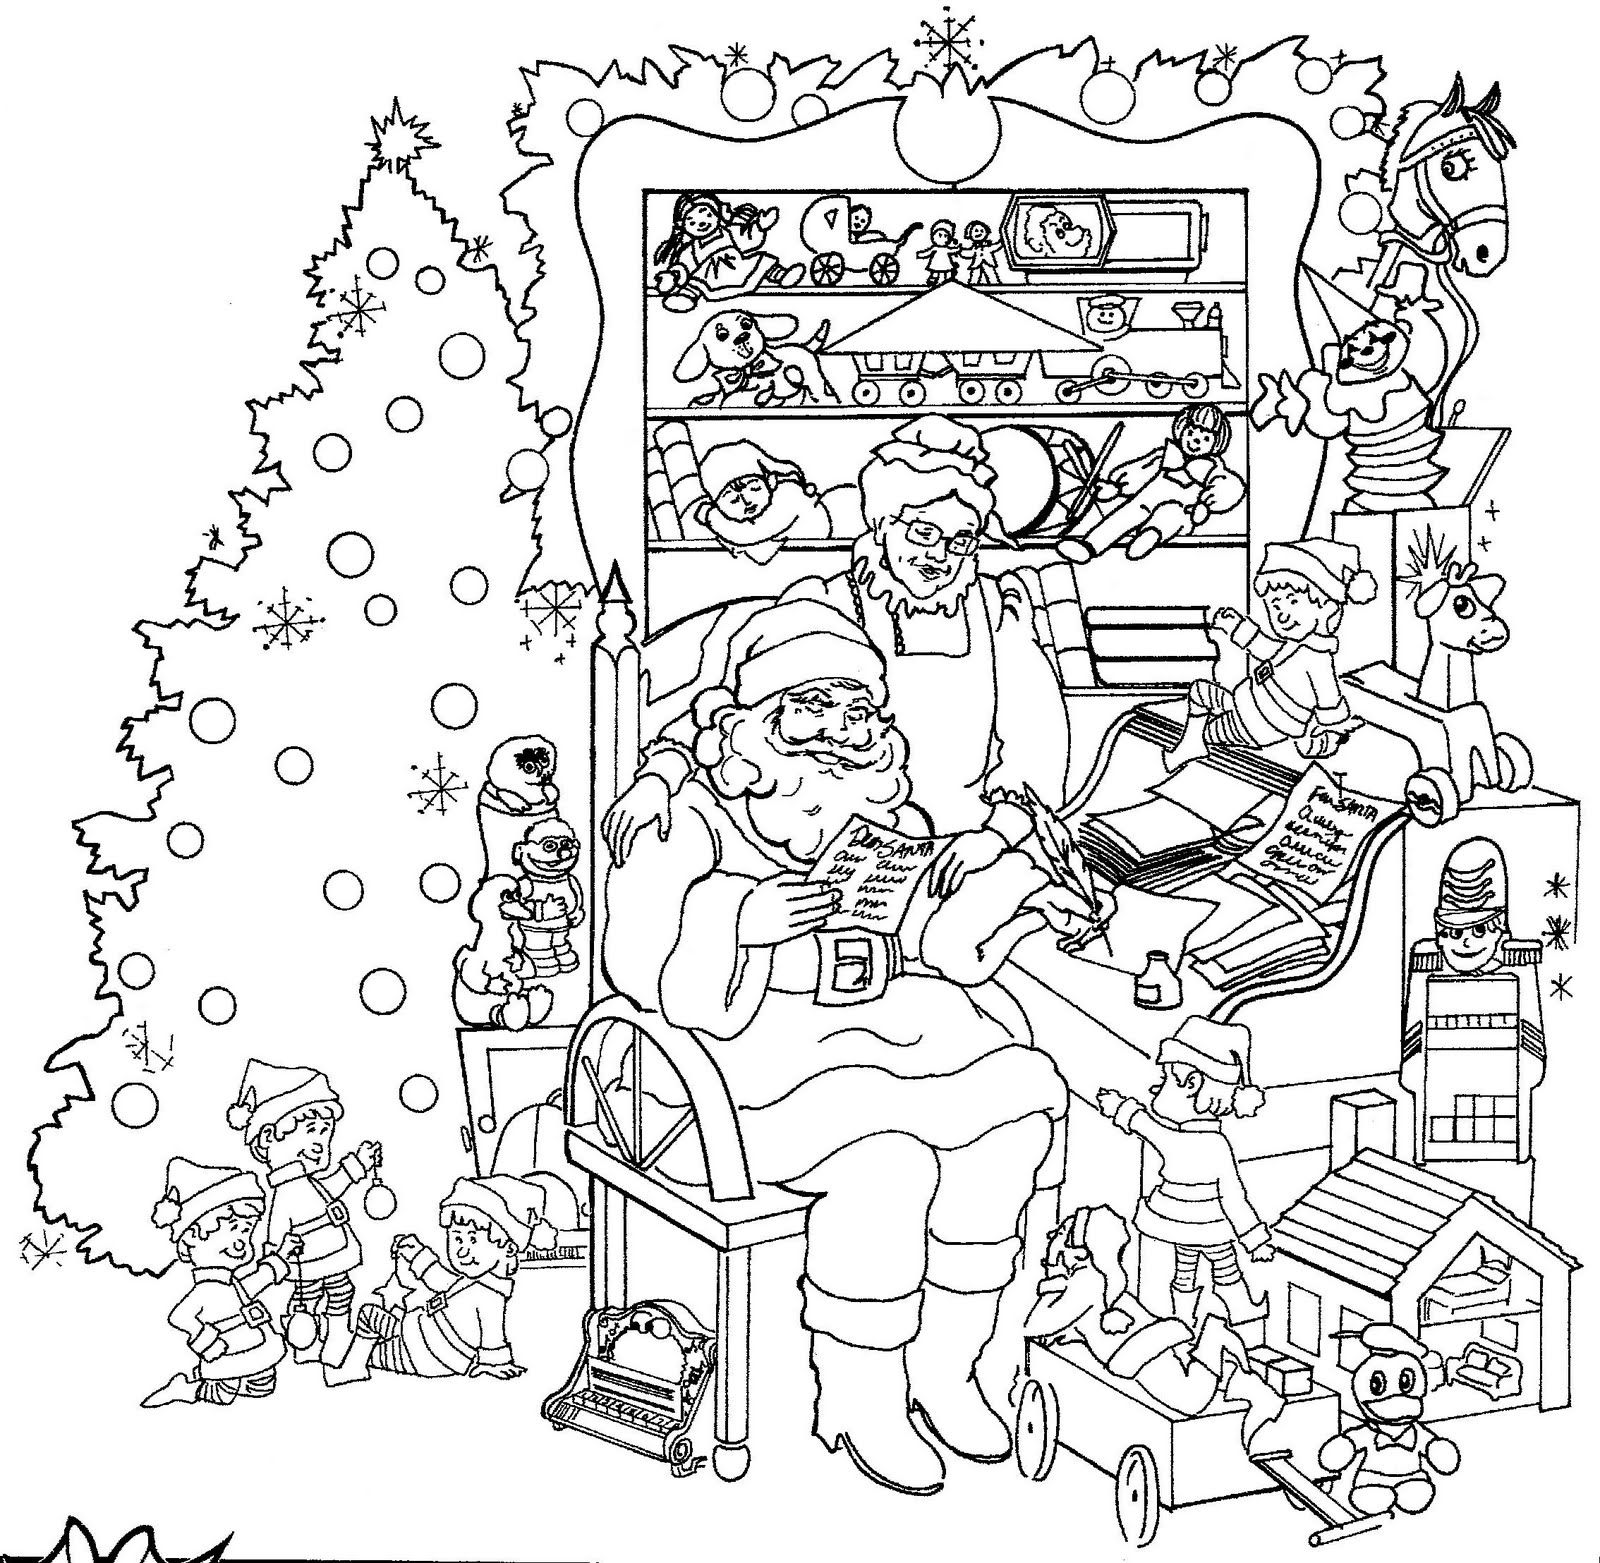 Christmas Adult Coloring Page